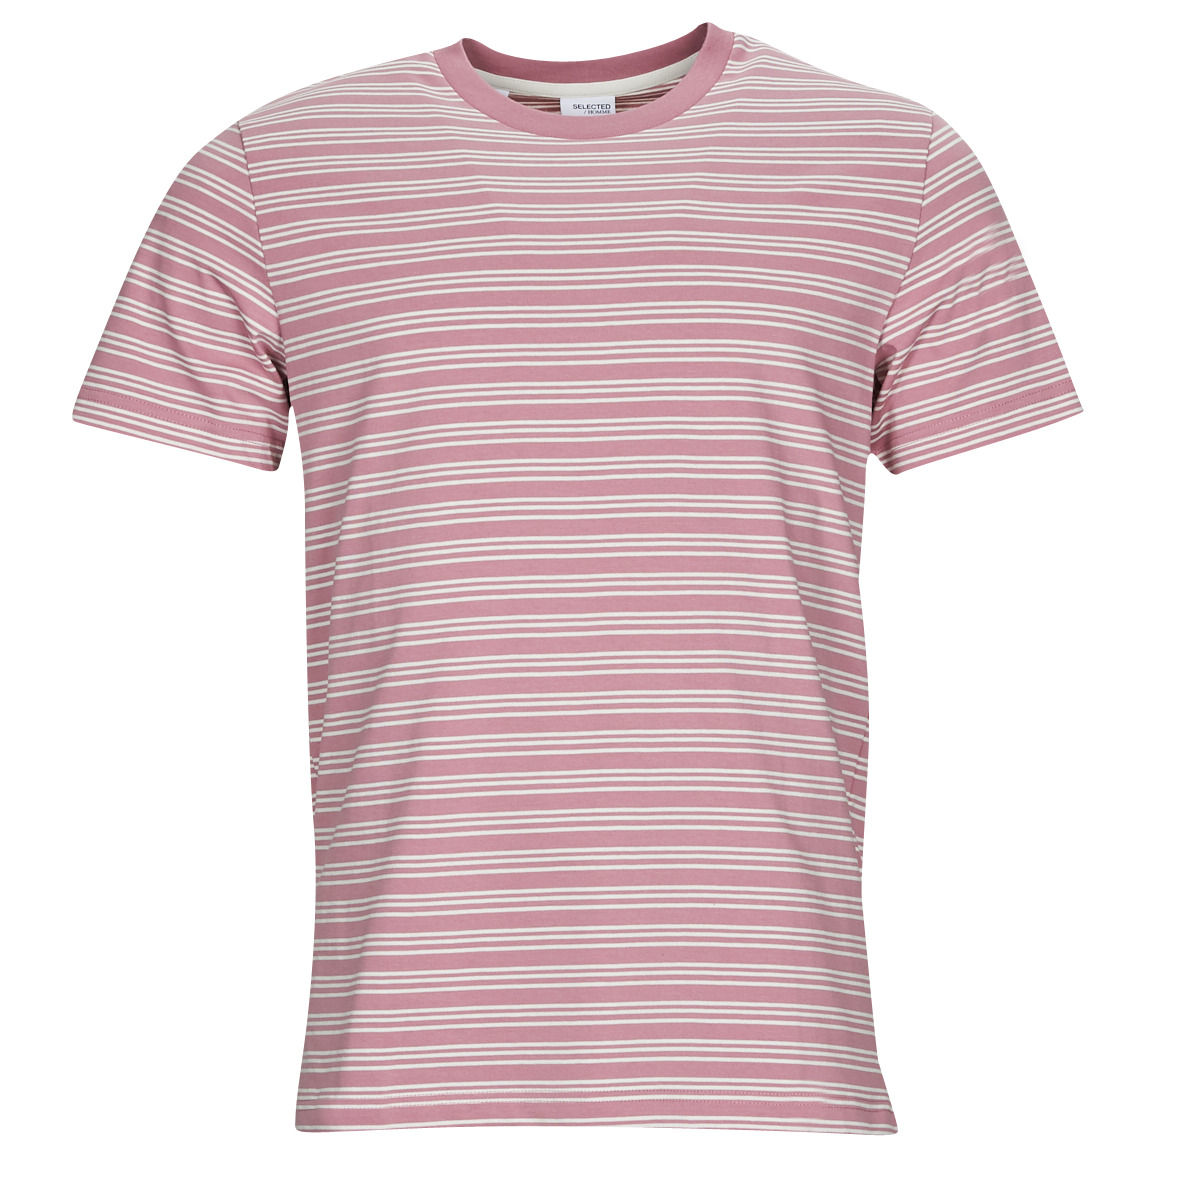 Selected Multicolore SLHANDY STRIPE SS O-NECK TEE W OCVkPEjn